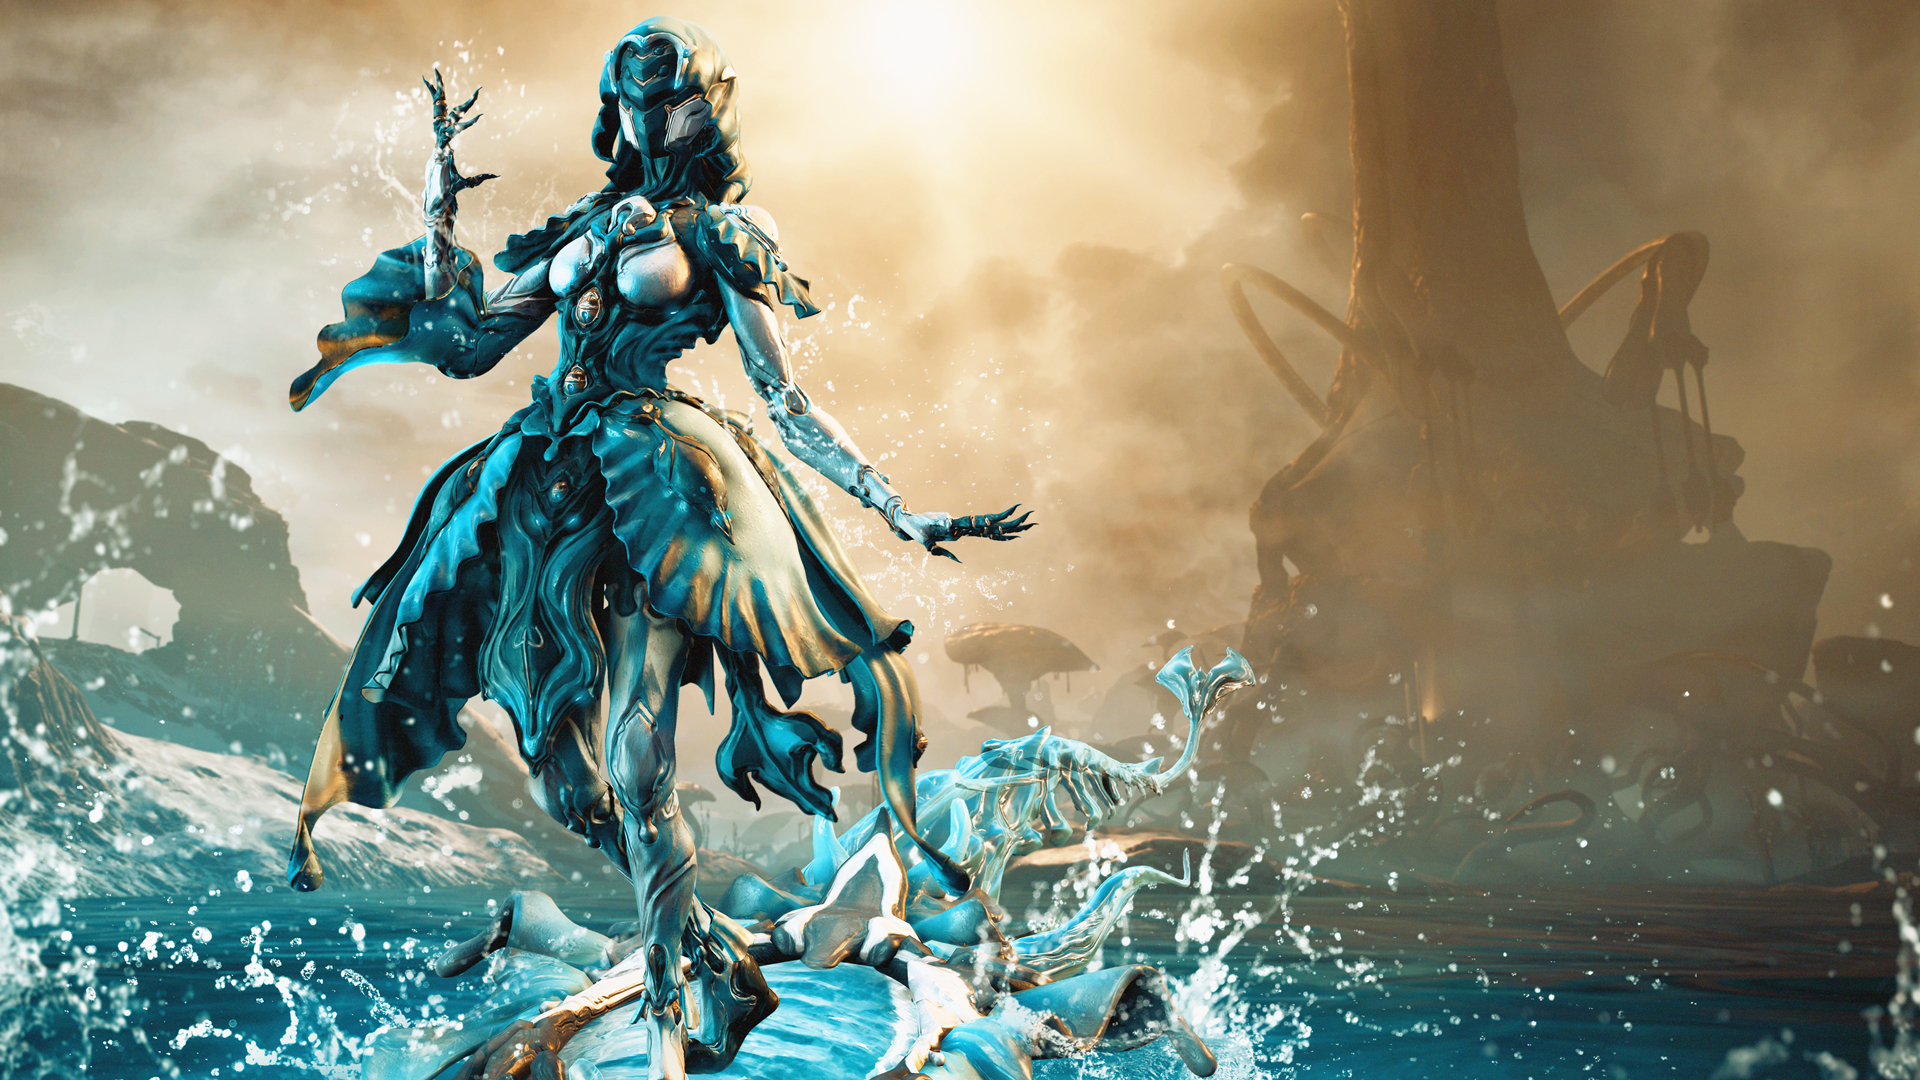 Sisters Of Parvos Warframe Wallpaper Hd Games 4k Wallpapers Images Photos And Background Wallpapers Den